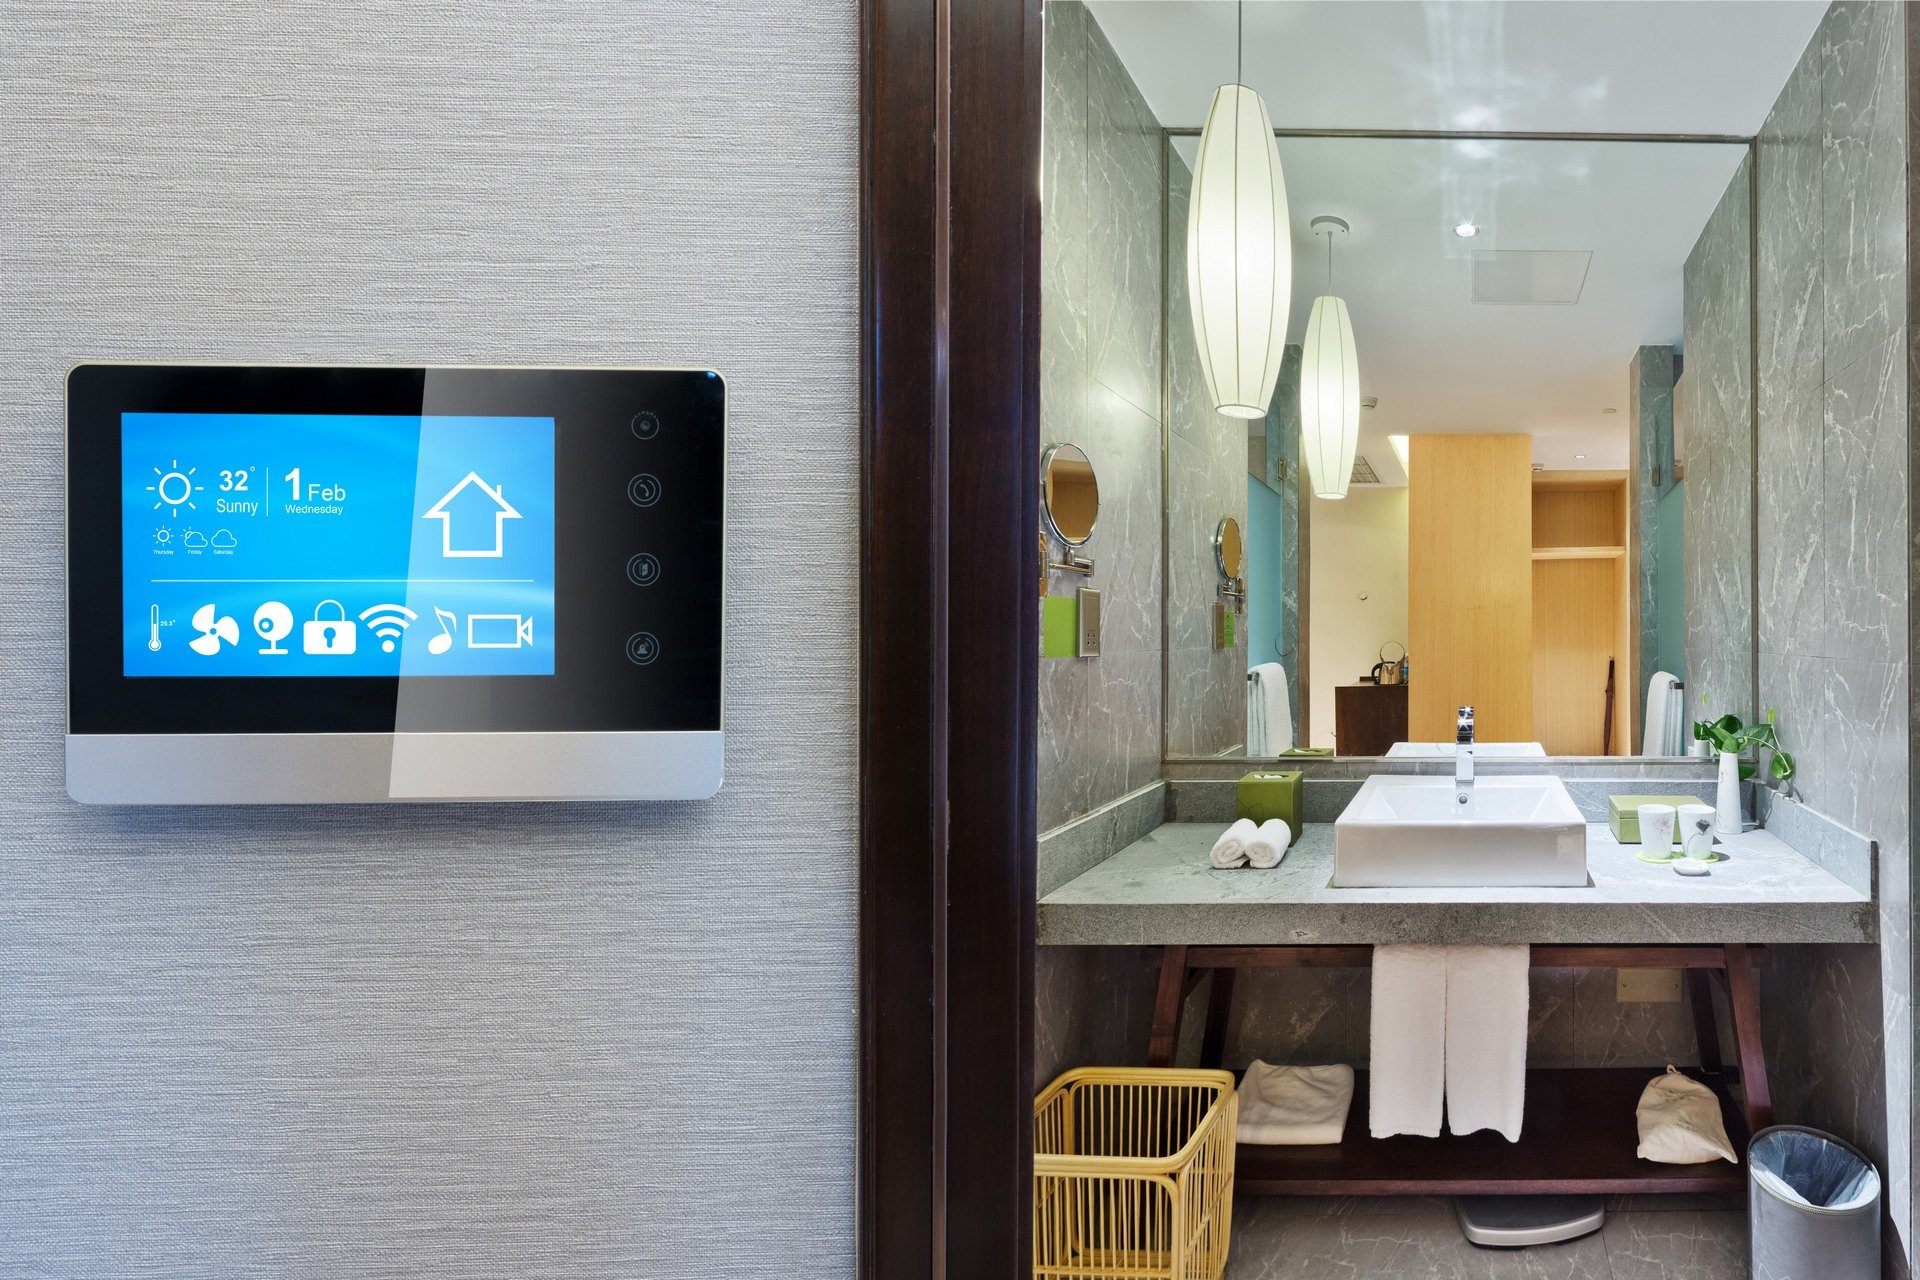 What are smart hotels and what technology do they use?